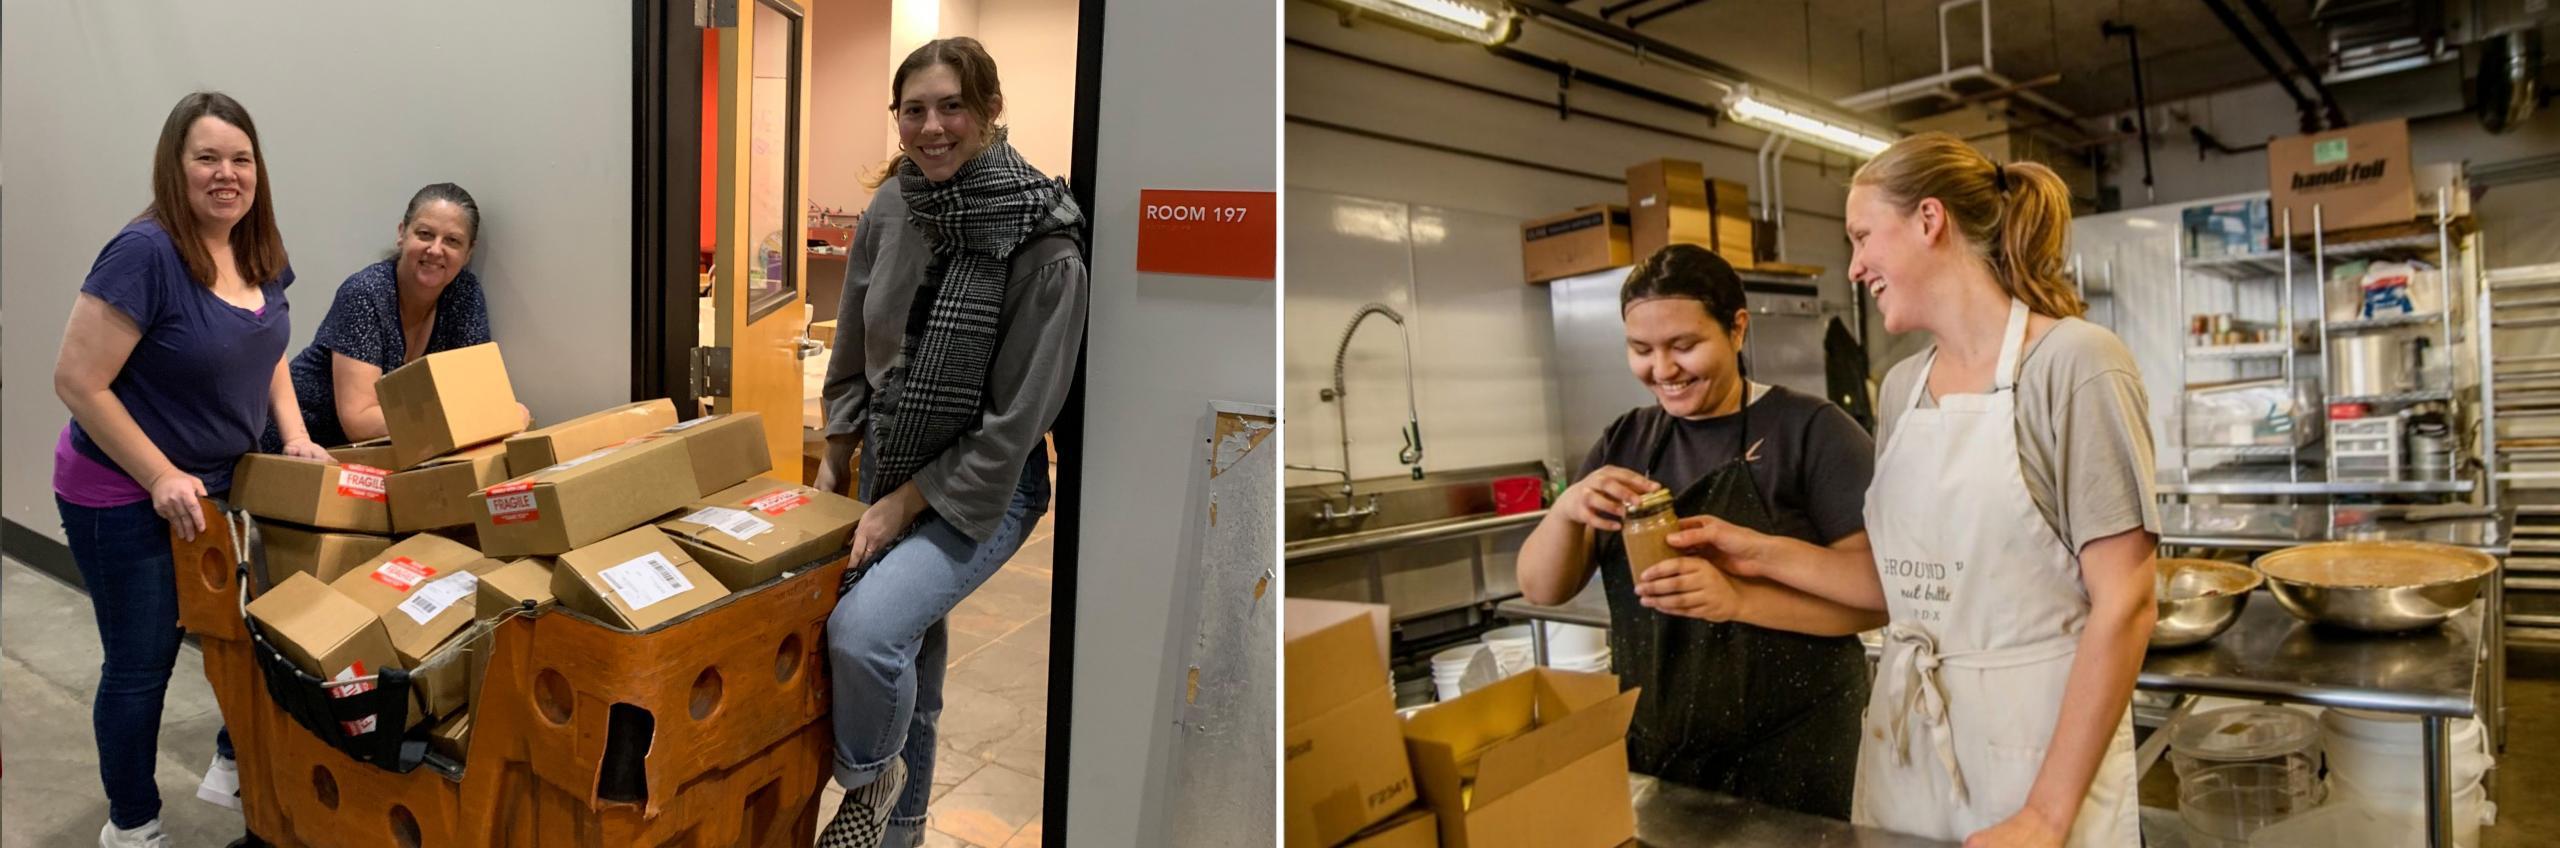 Two photos side-by-side. In the left photo, three woman are standing in front of an office doorway. Between them is a cart filled with cardboard boxes marked 'Fragile.' In the right photo, a woman smiles as she holds a jar of unlabeled nut butter. Another woman standing to her left laughs as her right arm extends toward the same jar of nut butter. They are standing in an industrial kitchen.